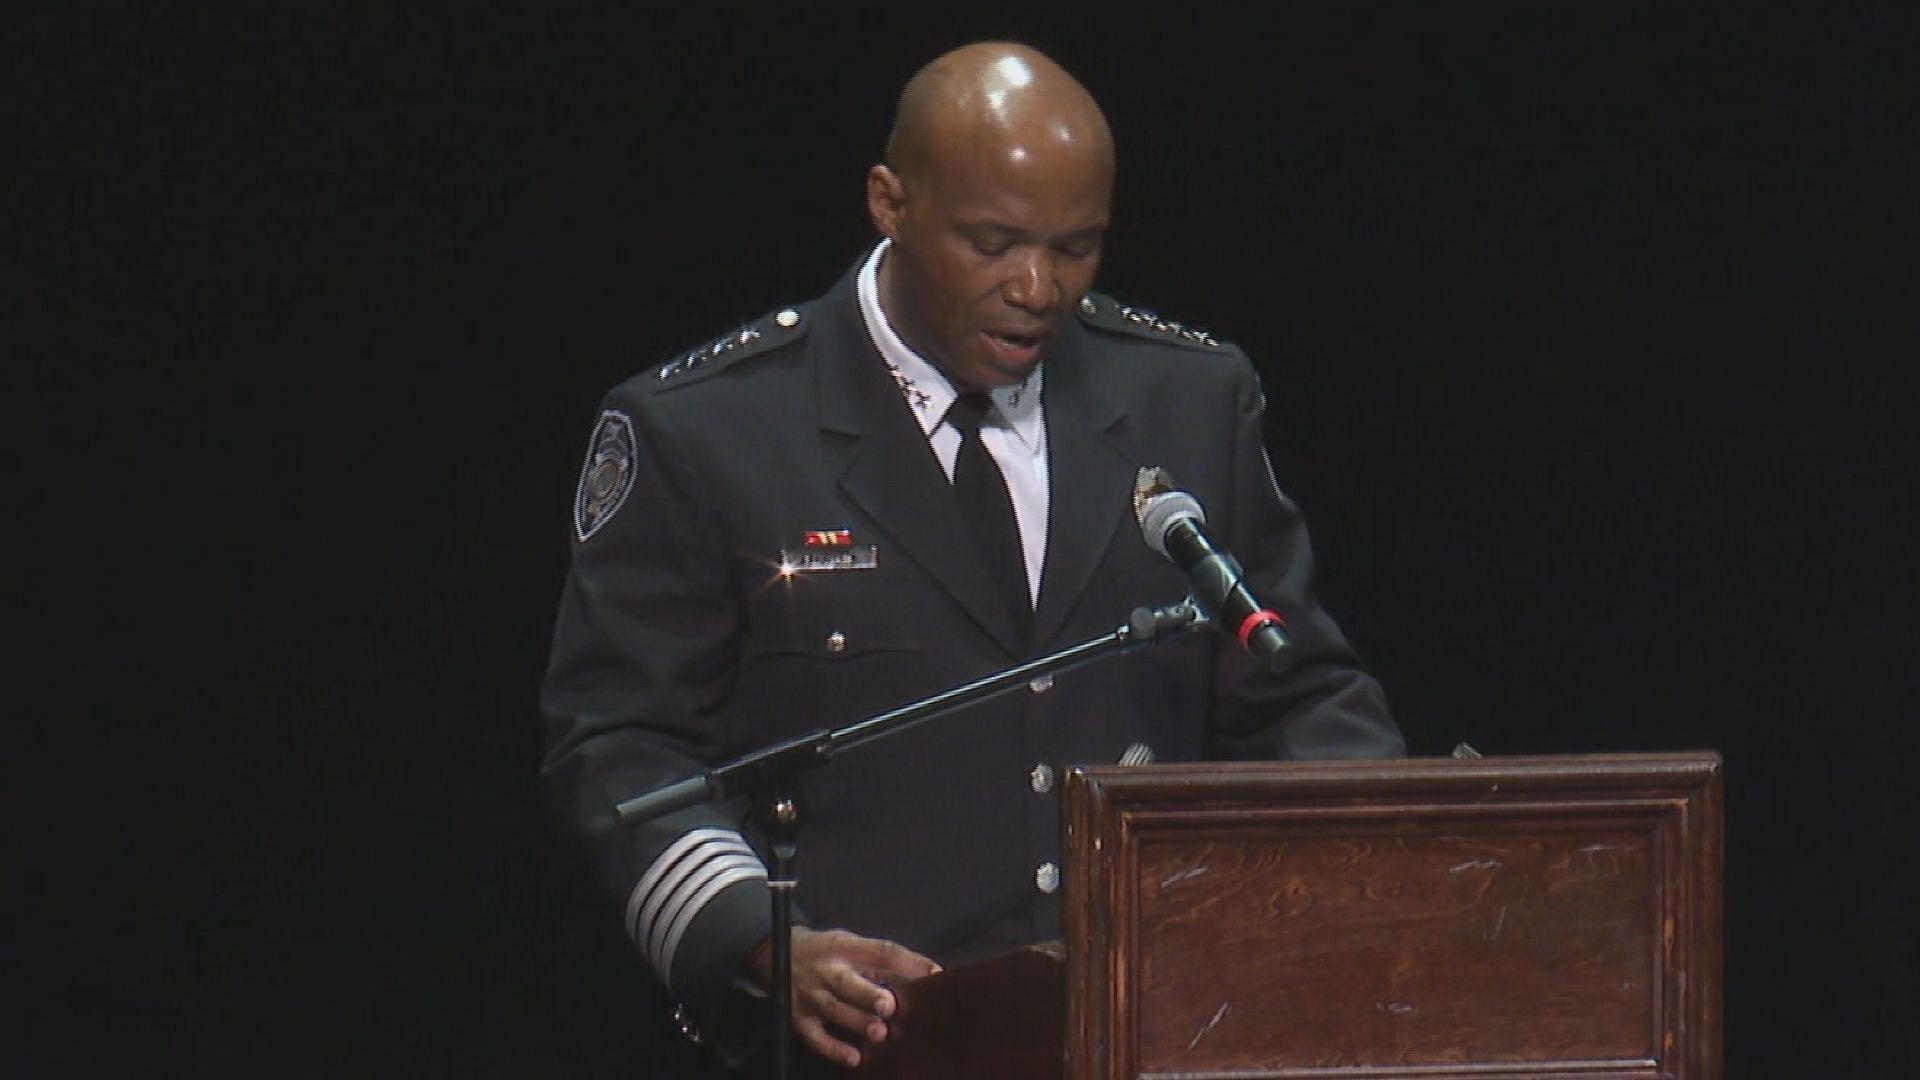 For the first time since his announcement, Greensboro Police Chief Brian James is talking about his retirement plans.